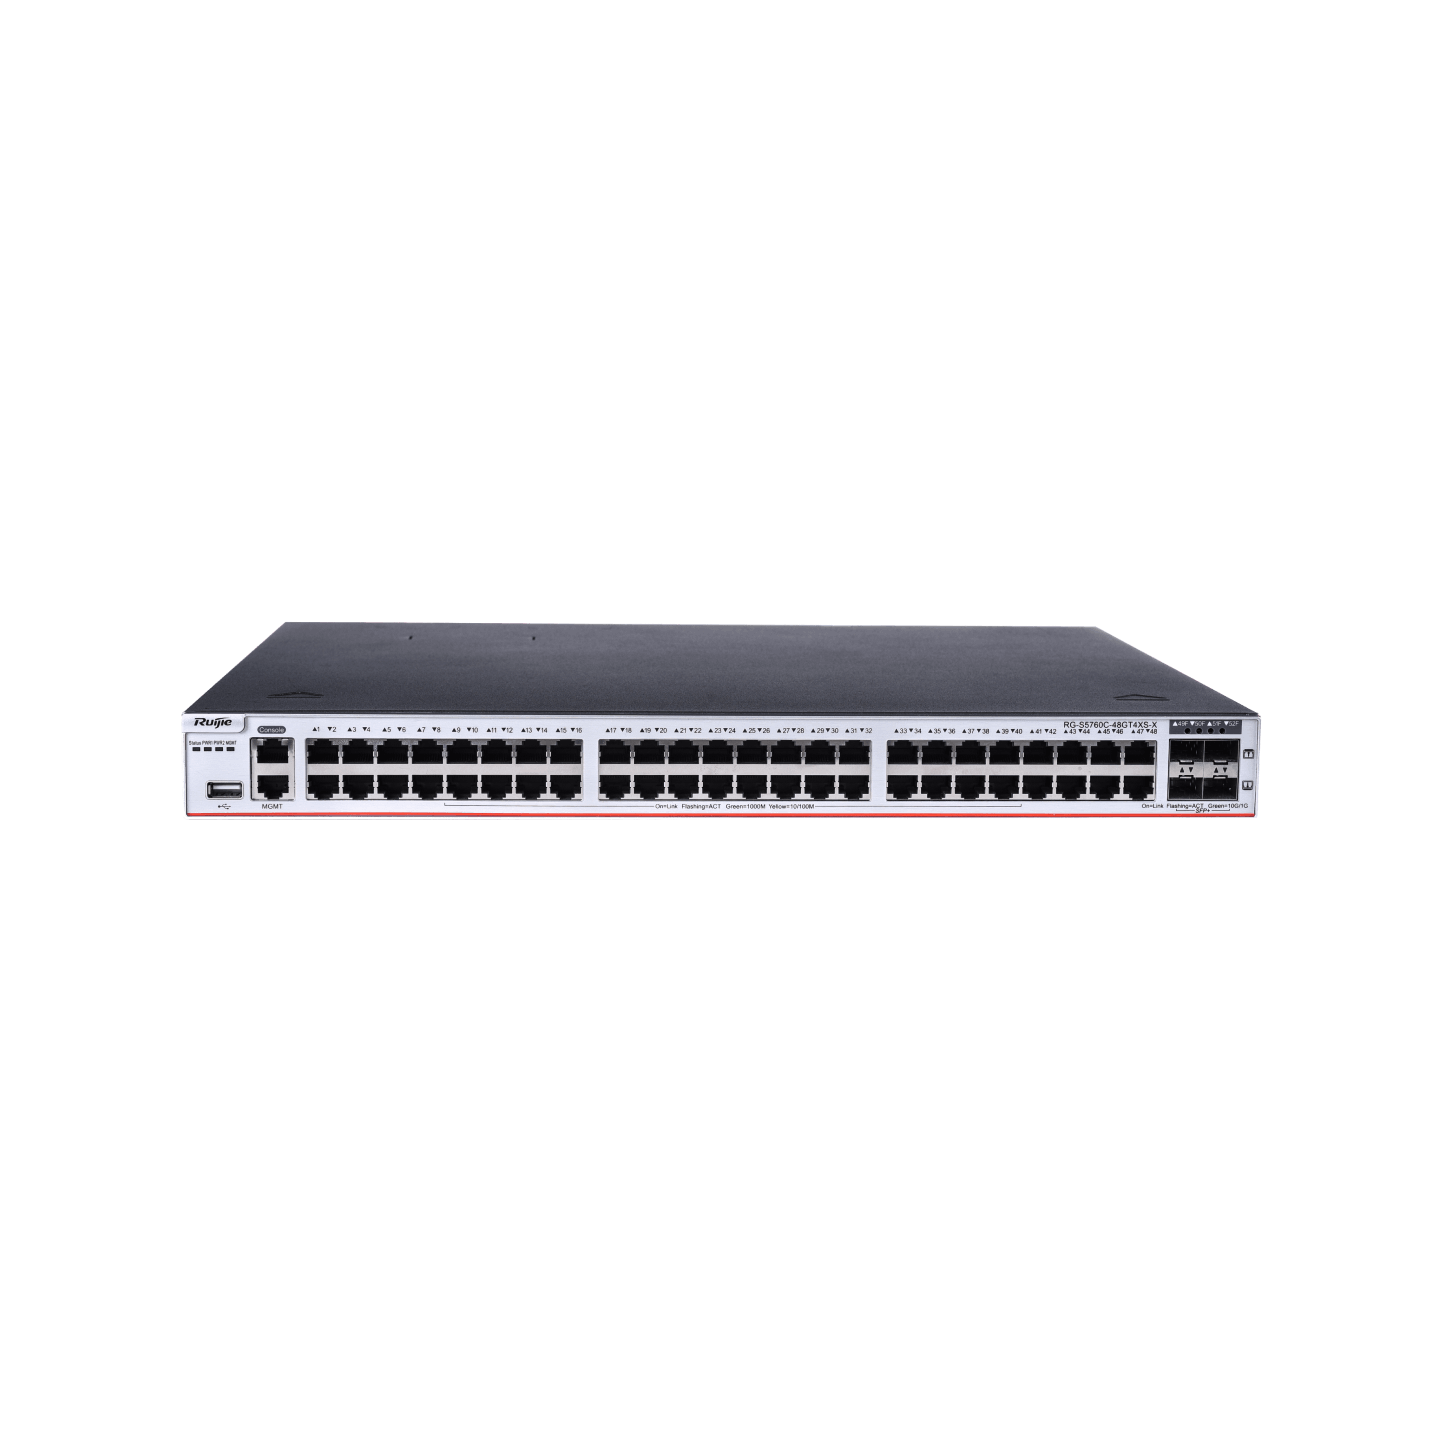 RG-S5760C-48GT4XS-X 48-Port GE Electrical Layer 3 Enterprise-Class Core or Aggregation Switch, Four 10G Uplink Ports